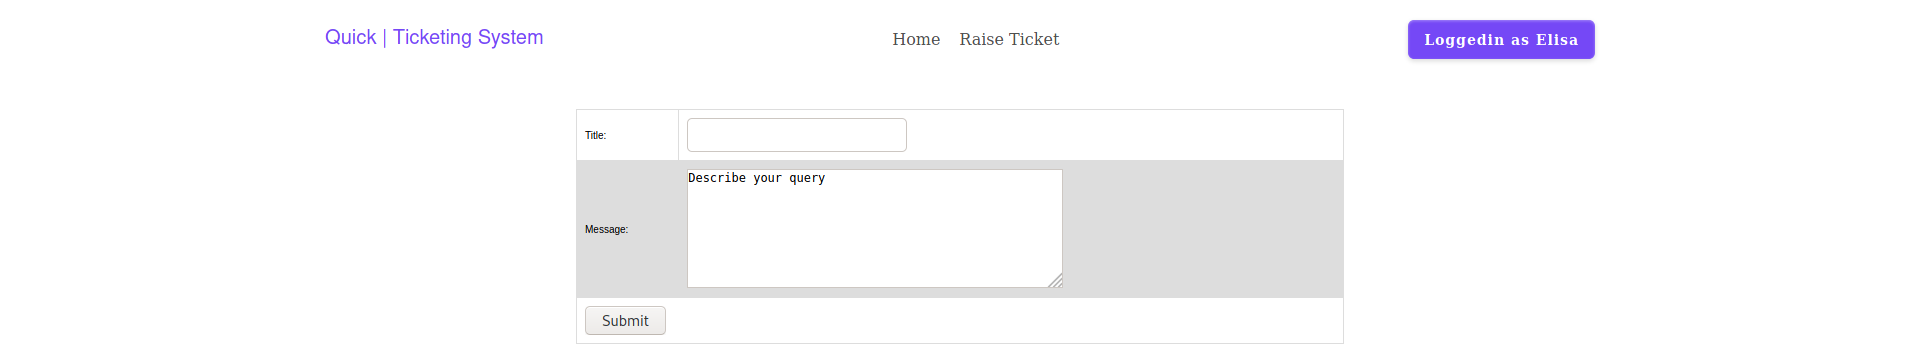 Quick - ticket.php